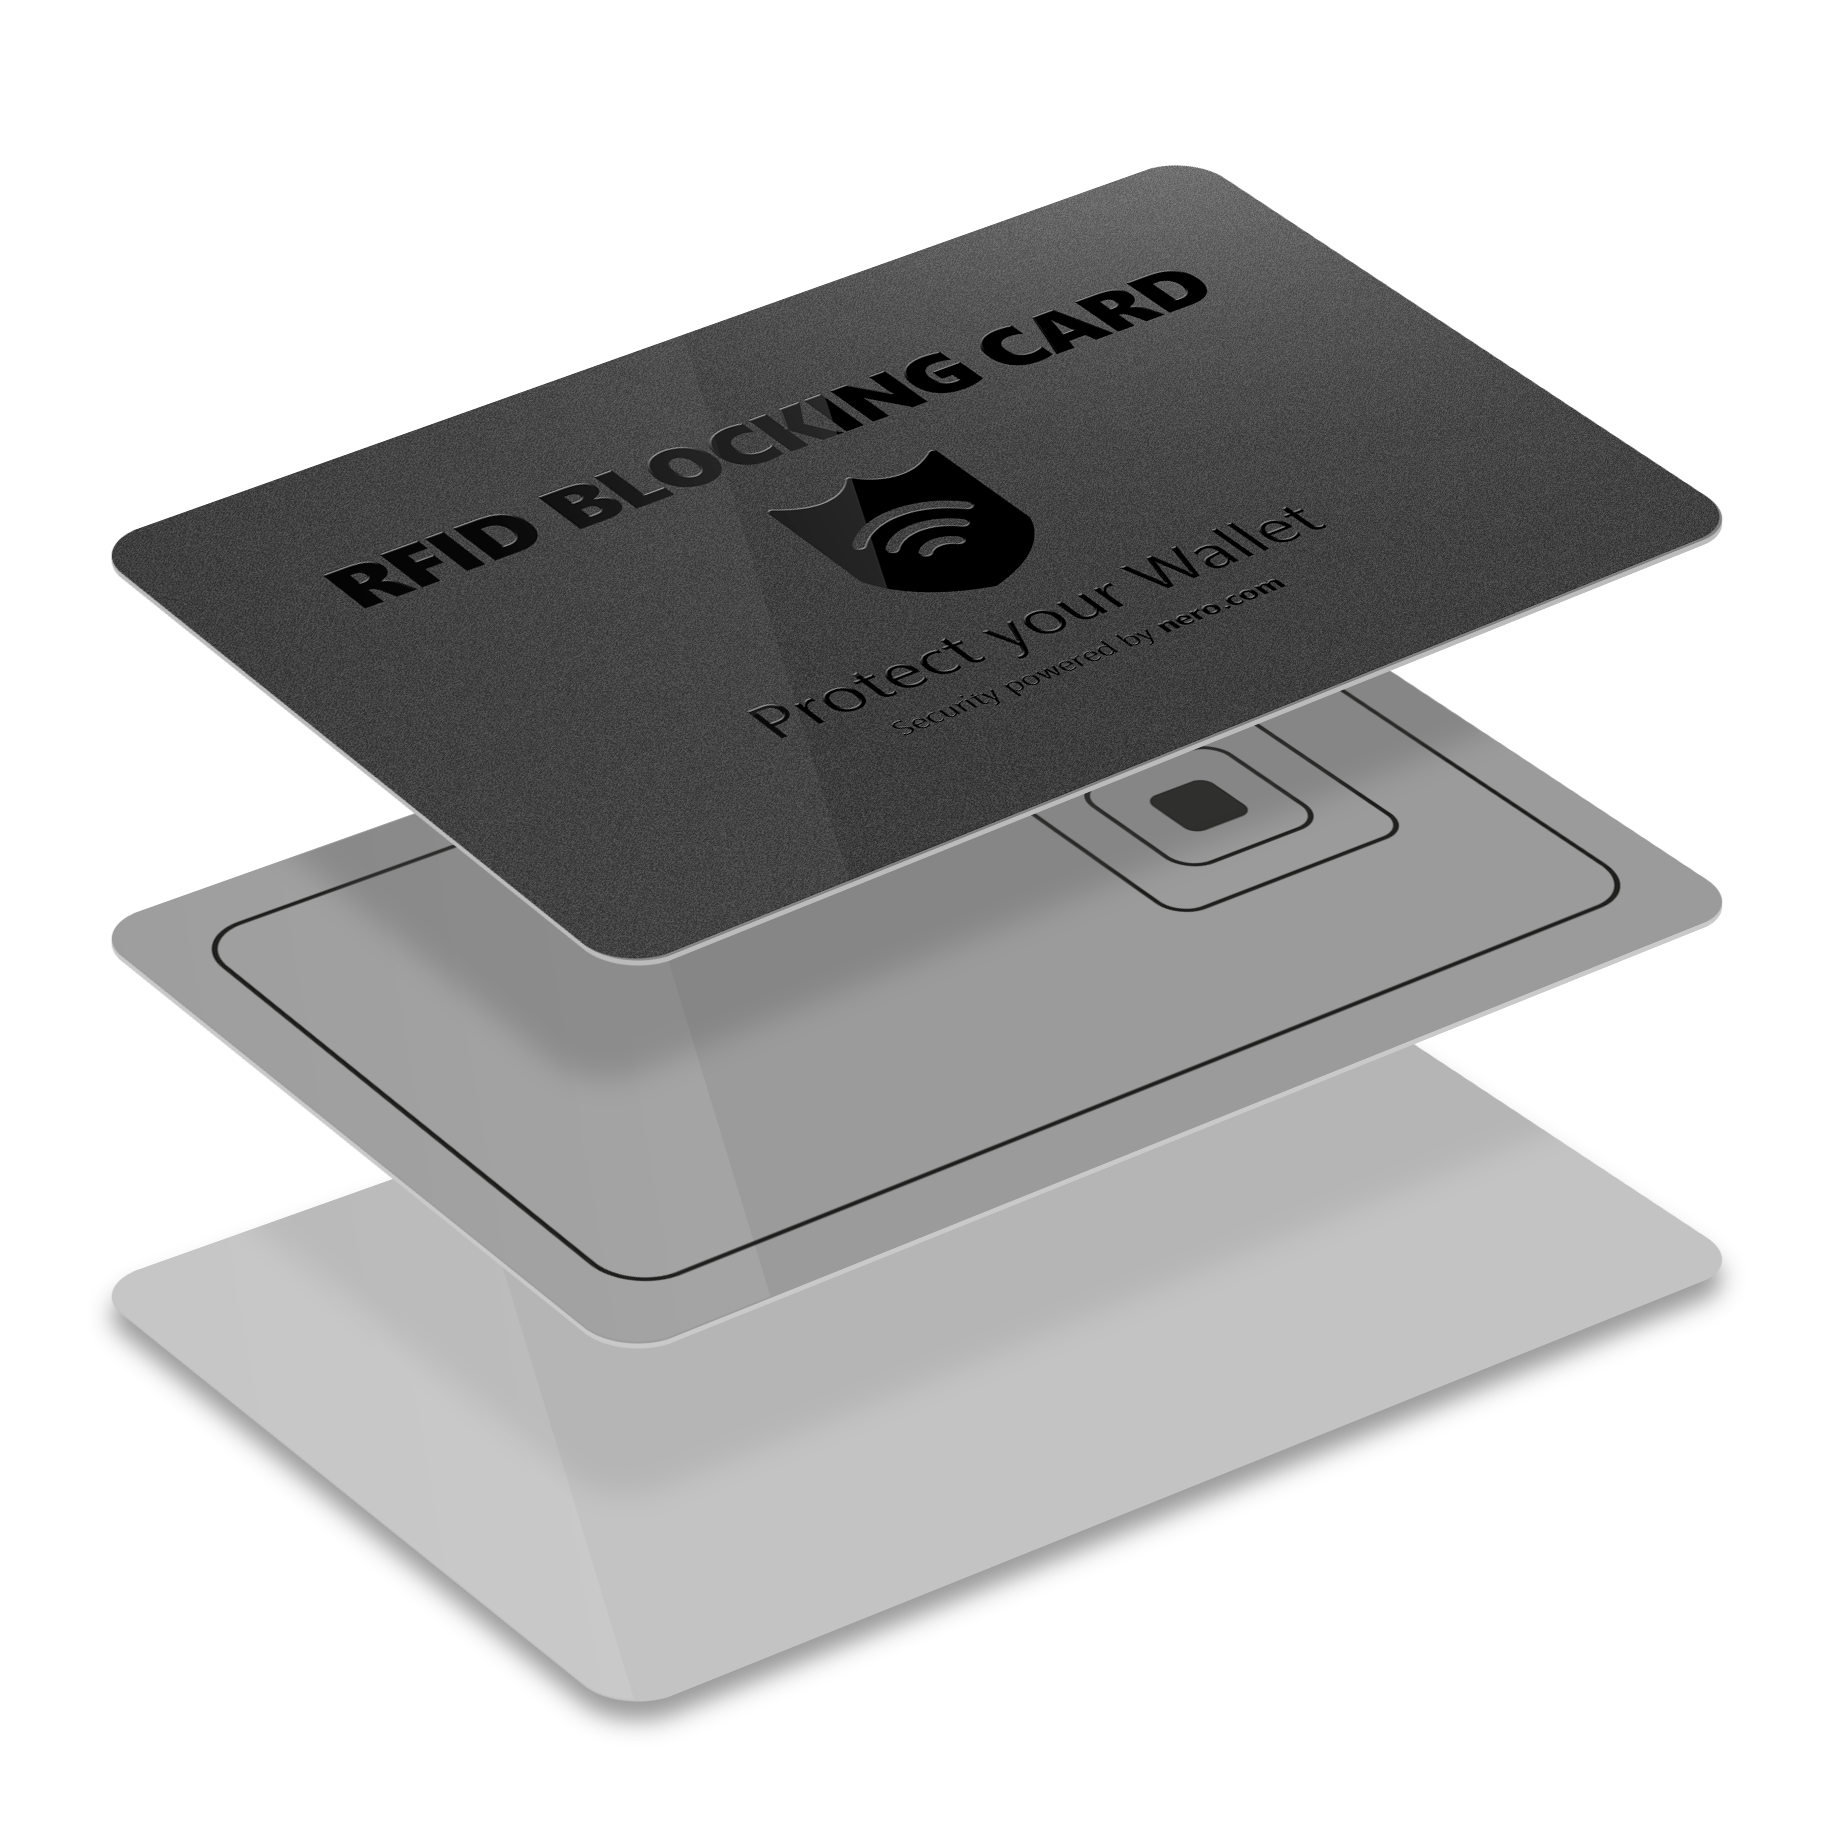 Nero RFID Blocking Card - Function overview